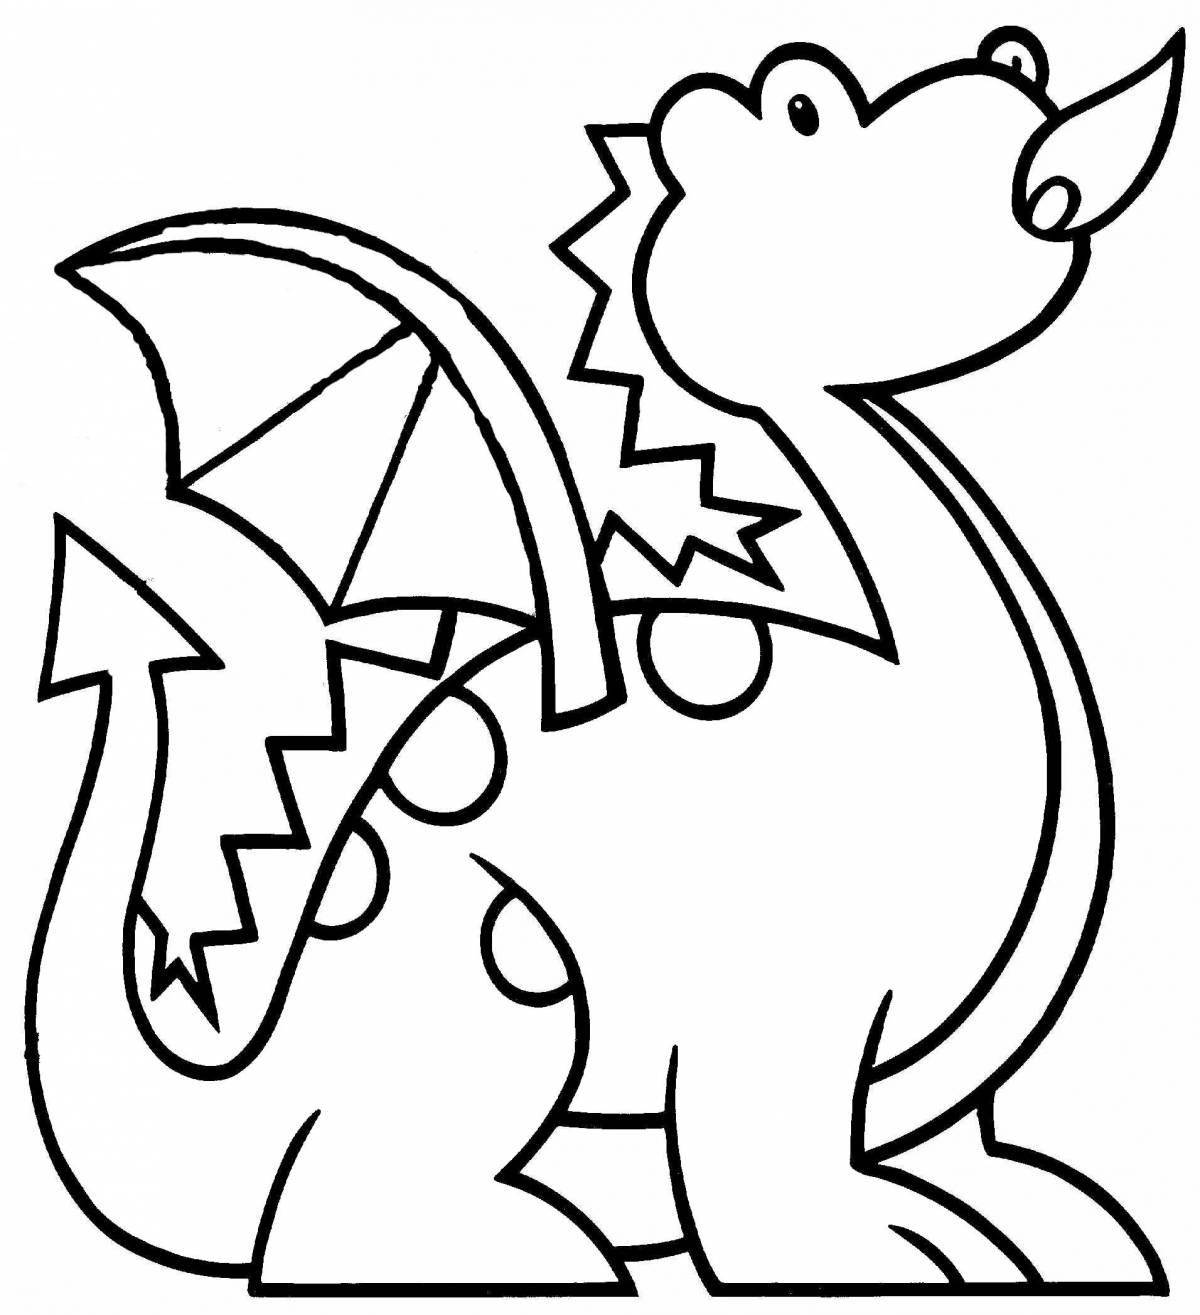 Playful dragon coloring book for kids